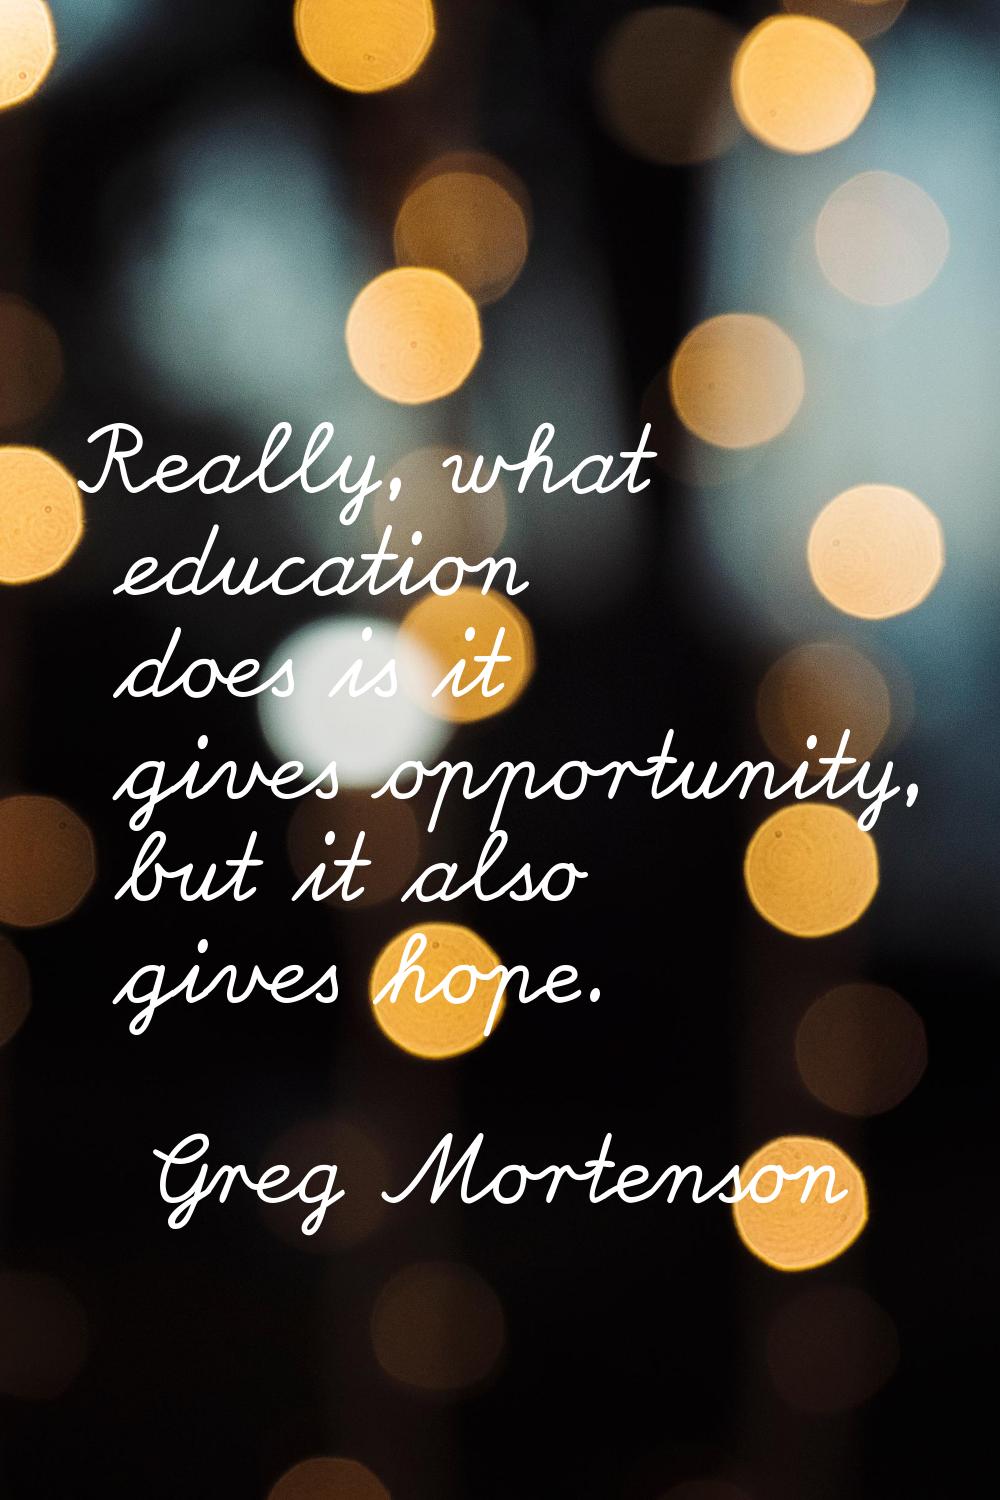 Really, what education does is it gives opportunity, but it also gives hope.